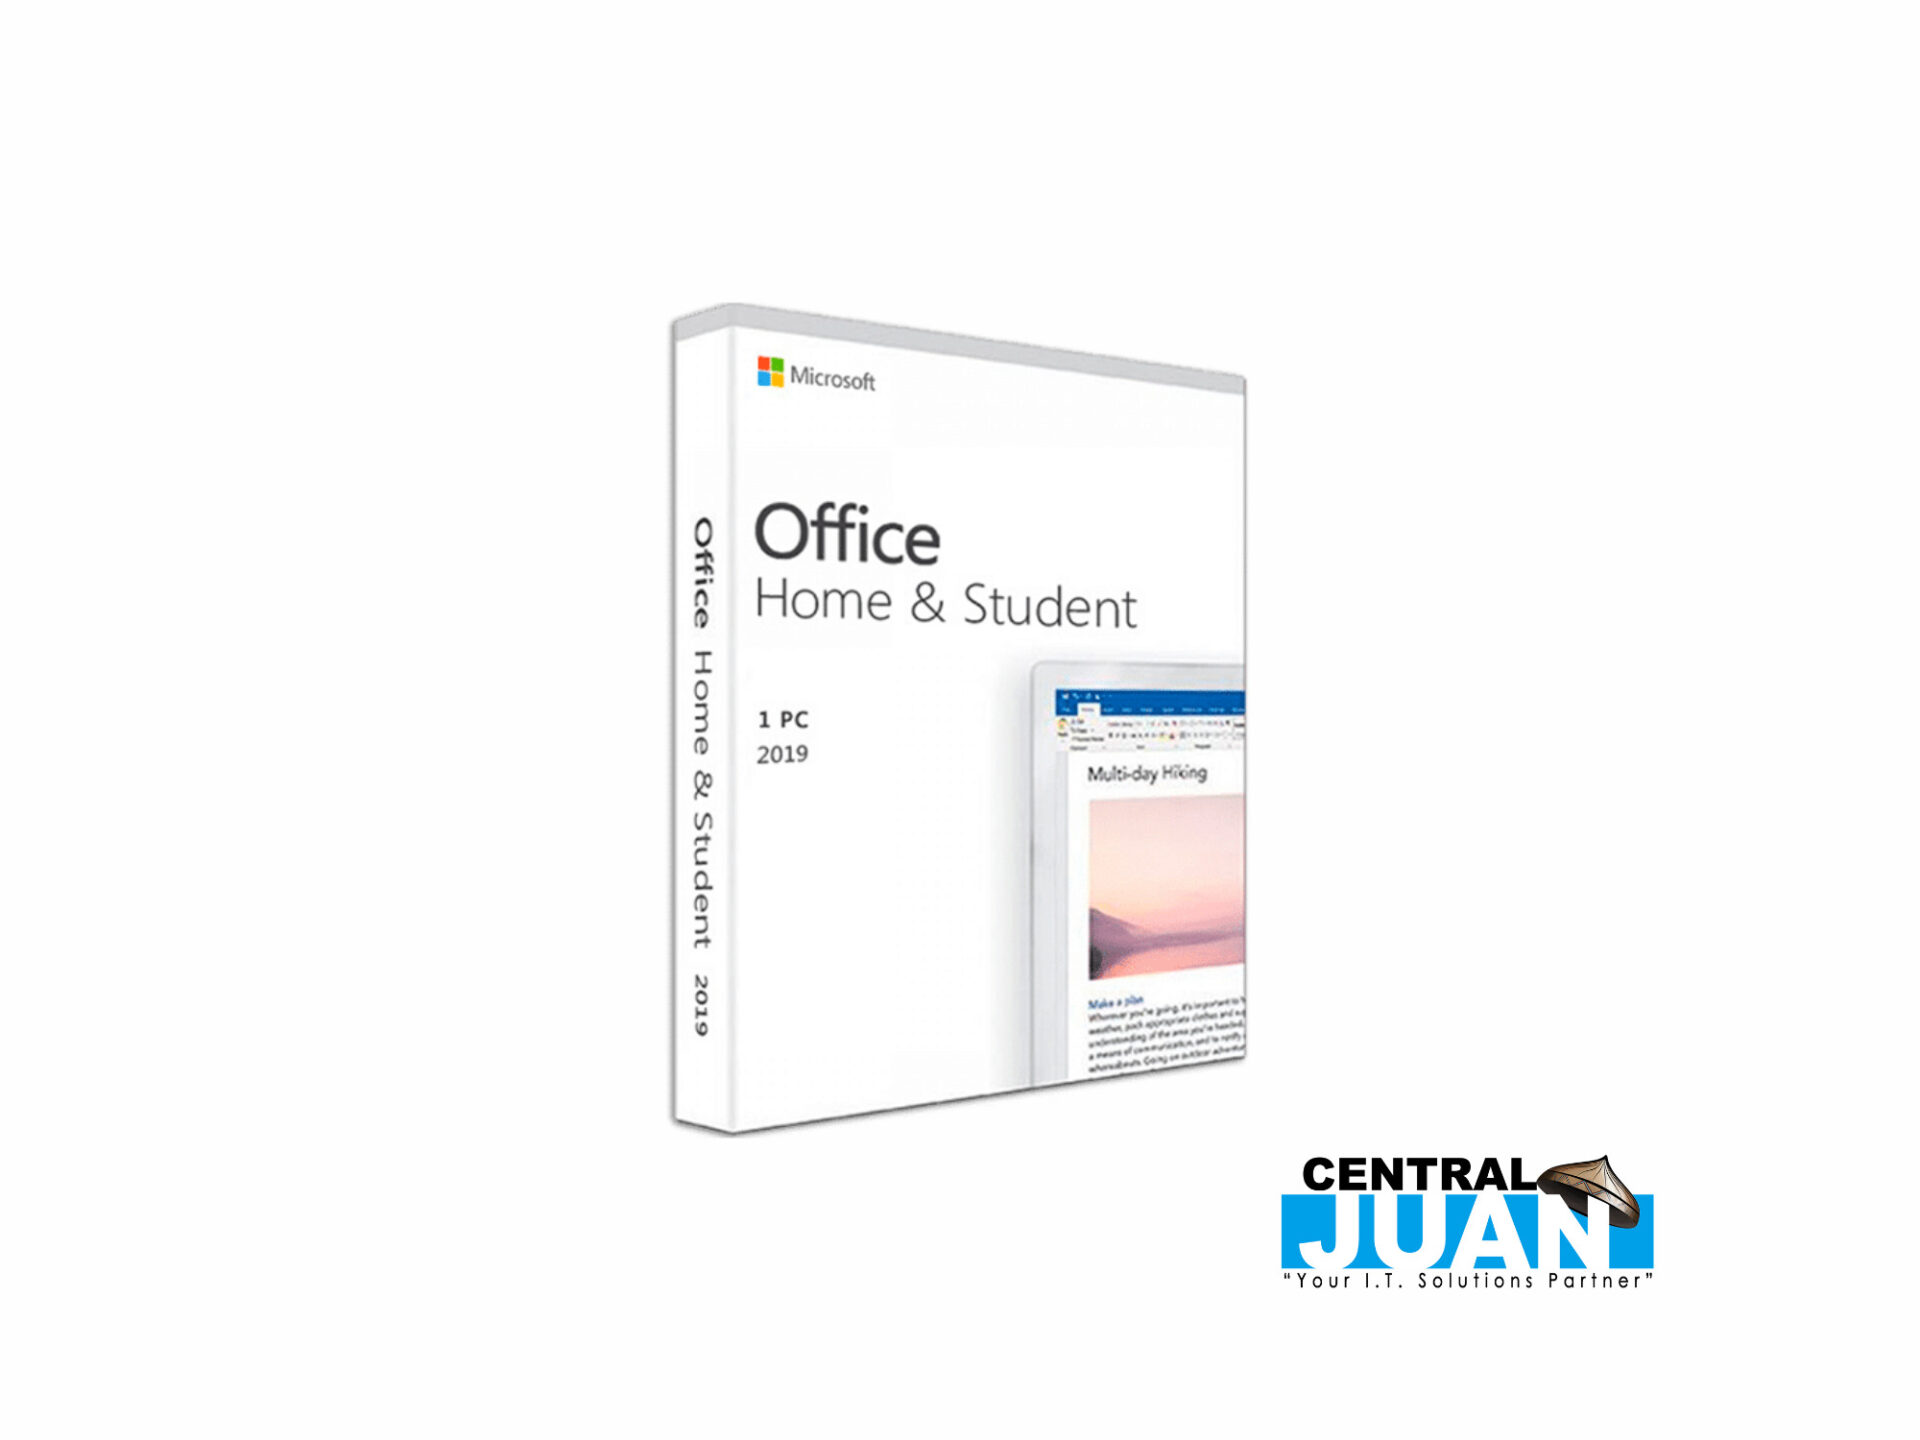 Microsoft Office 2019 Home/Student License | Central Juan IT Solutions